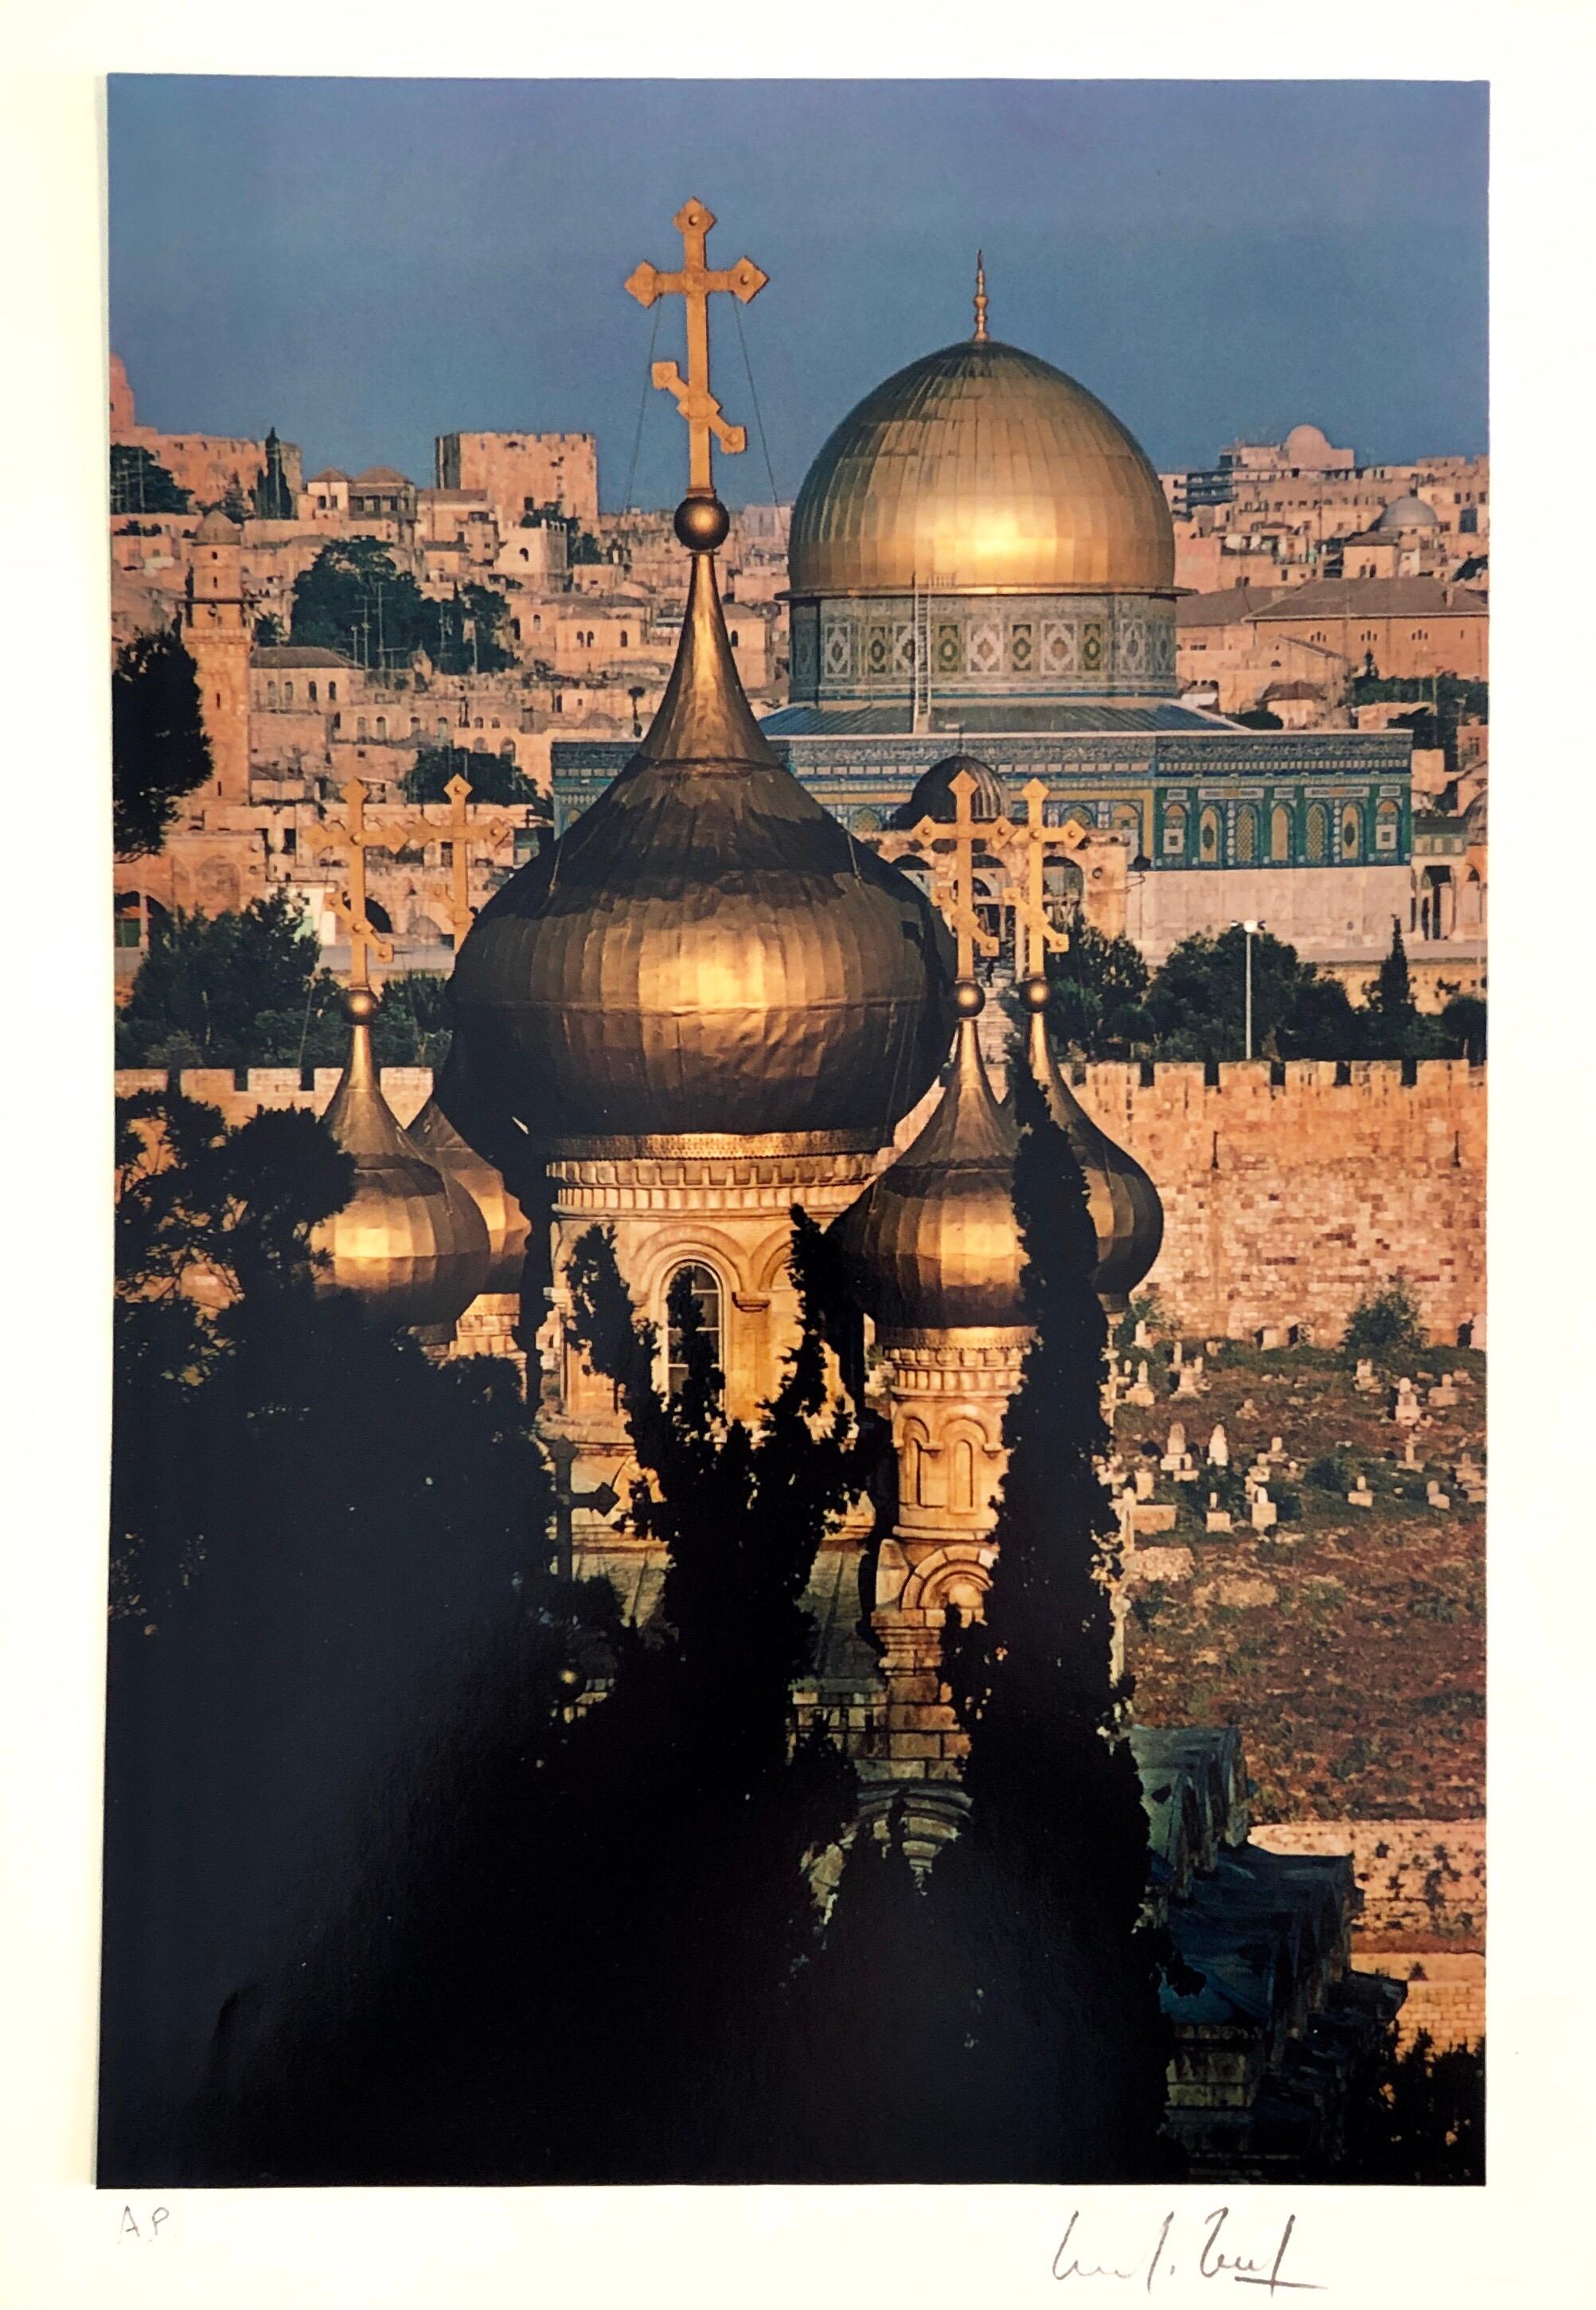 This is for one Photograph from the portfolio entitled "Jerusalem: City of Mankind," The mounting is 14 X 17 inches. the actual photo measurement is between 9.25 X 14 to 10.5 X 13.5 inches (22.9 X 35.6 to 26.7 X 34.3 cm.) This is hand signed and